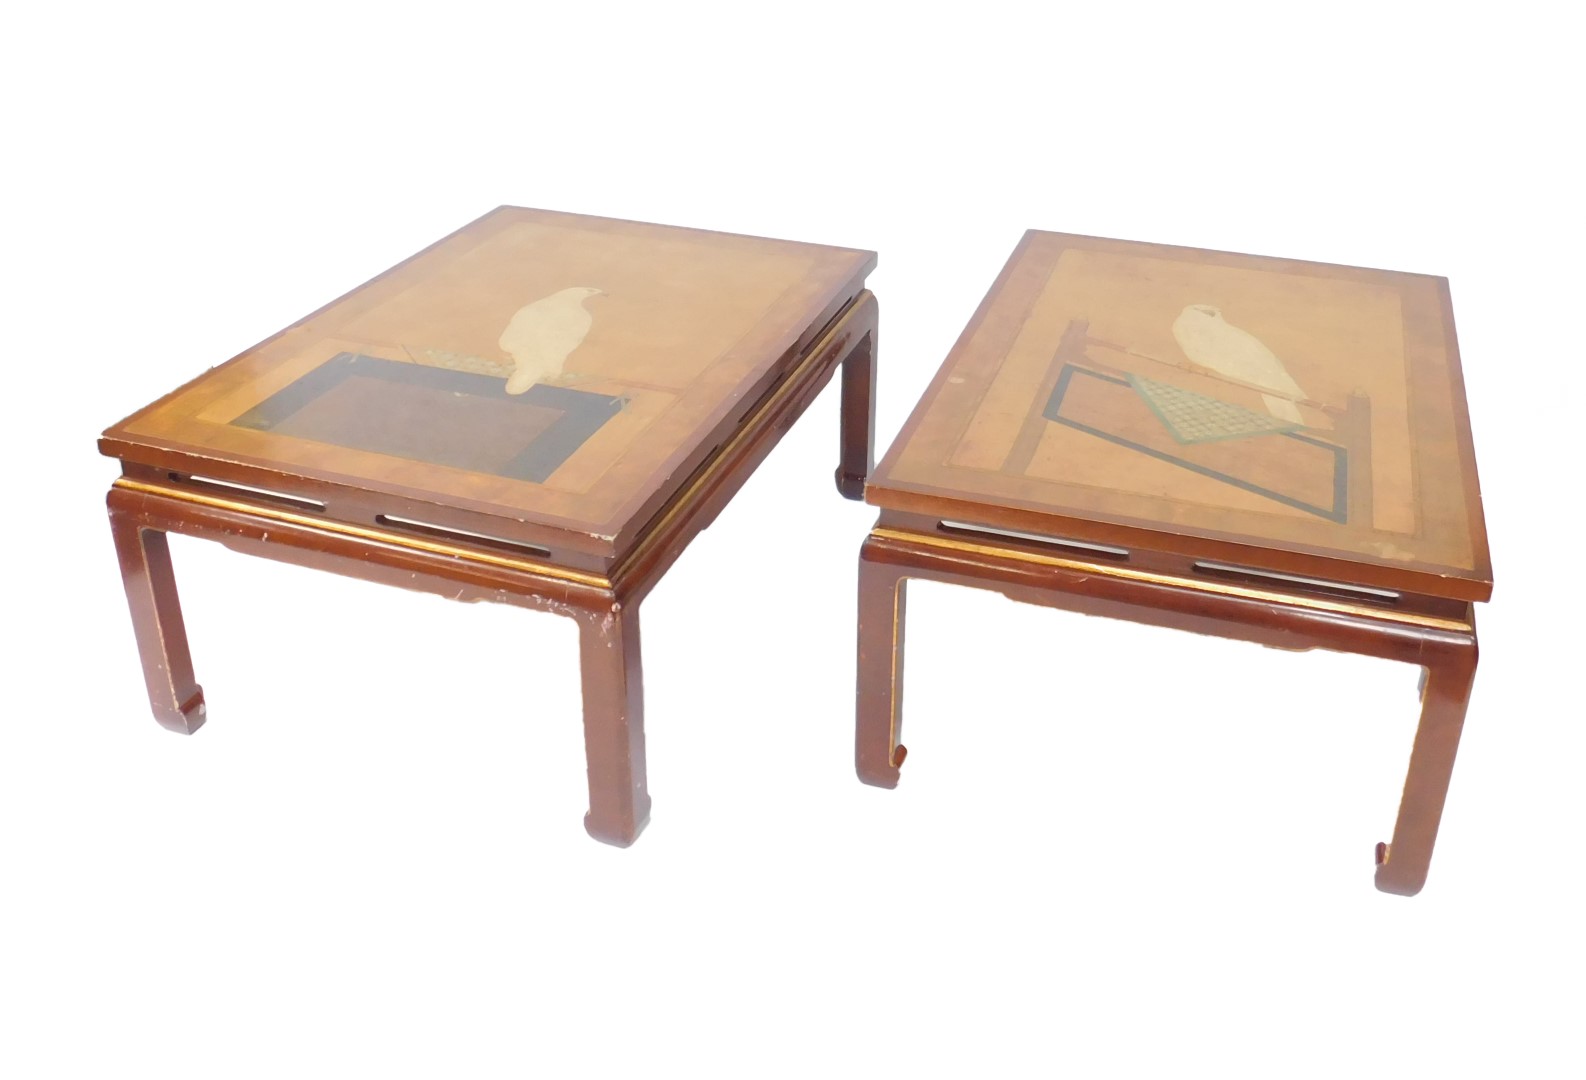 A pair of mid to late 20thC Japonesque tables, each with gilt and lacquer cross banding enclosing